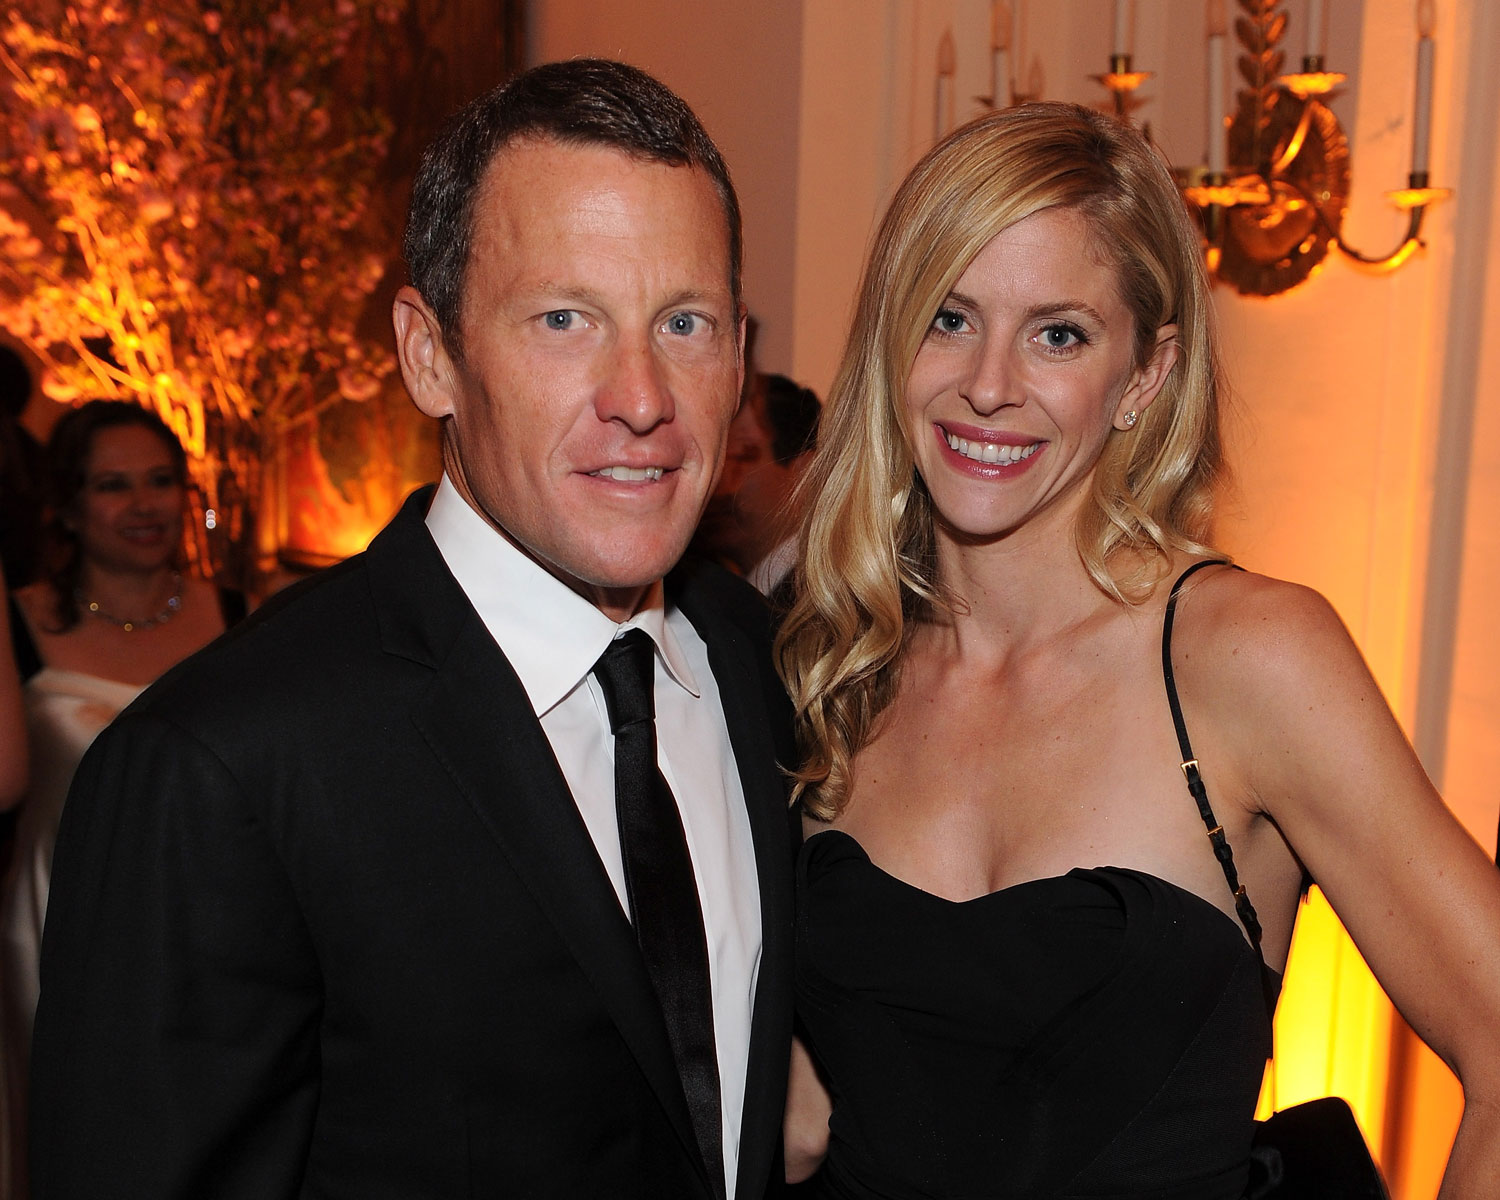 Lance Armstrong's dating life